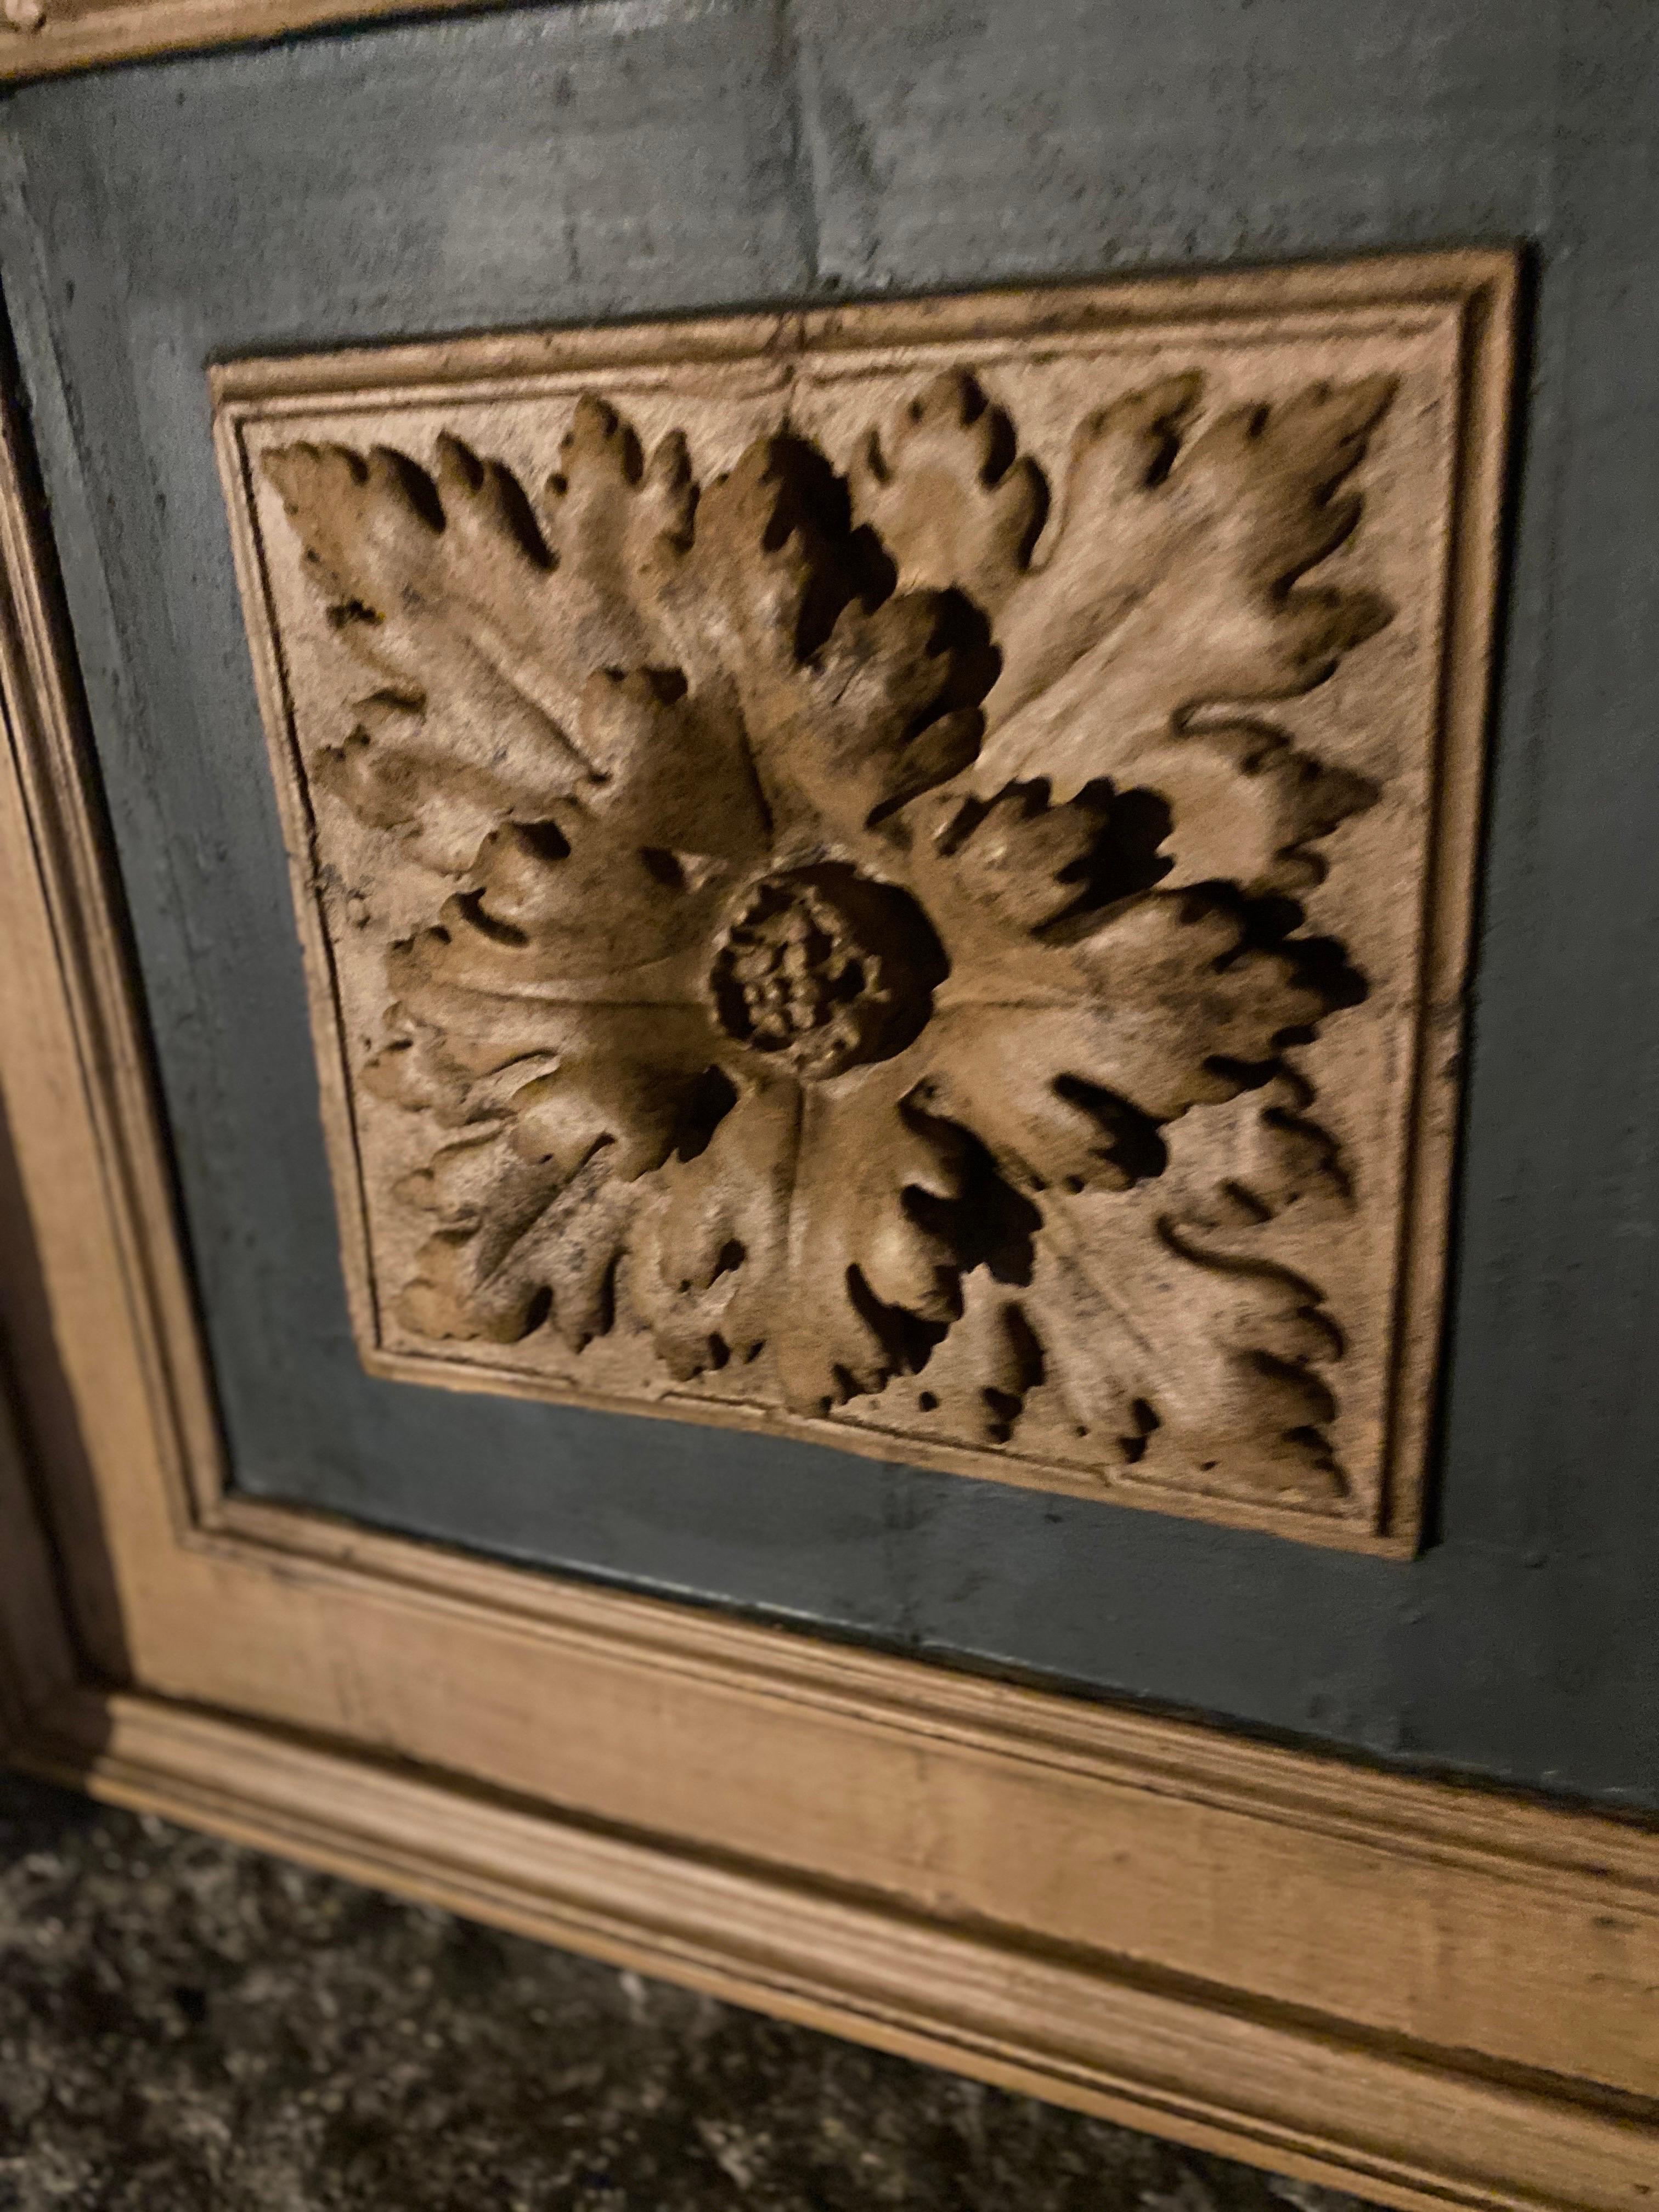 19th Century old polychrome wooden coffered ceiling tiles dating from the 19th century For Sale